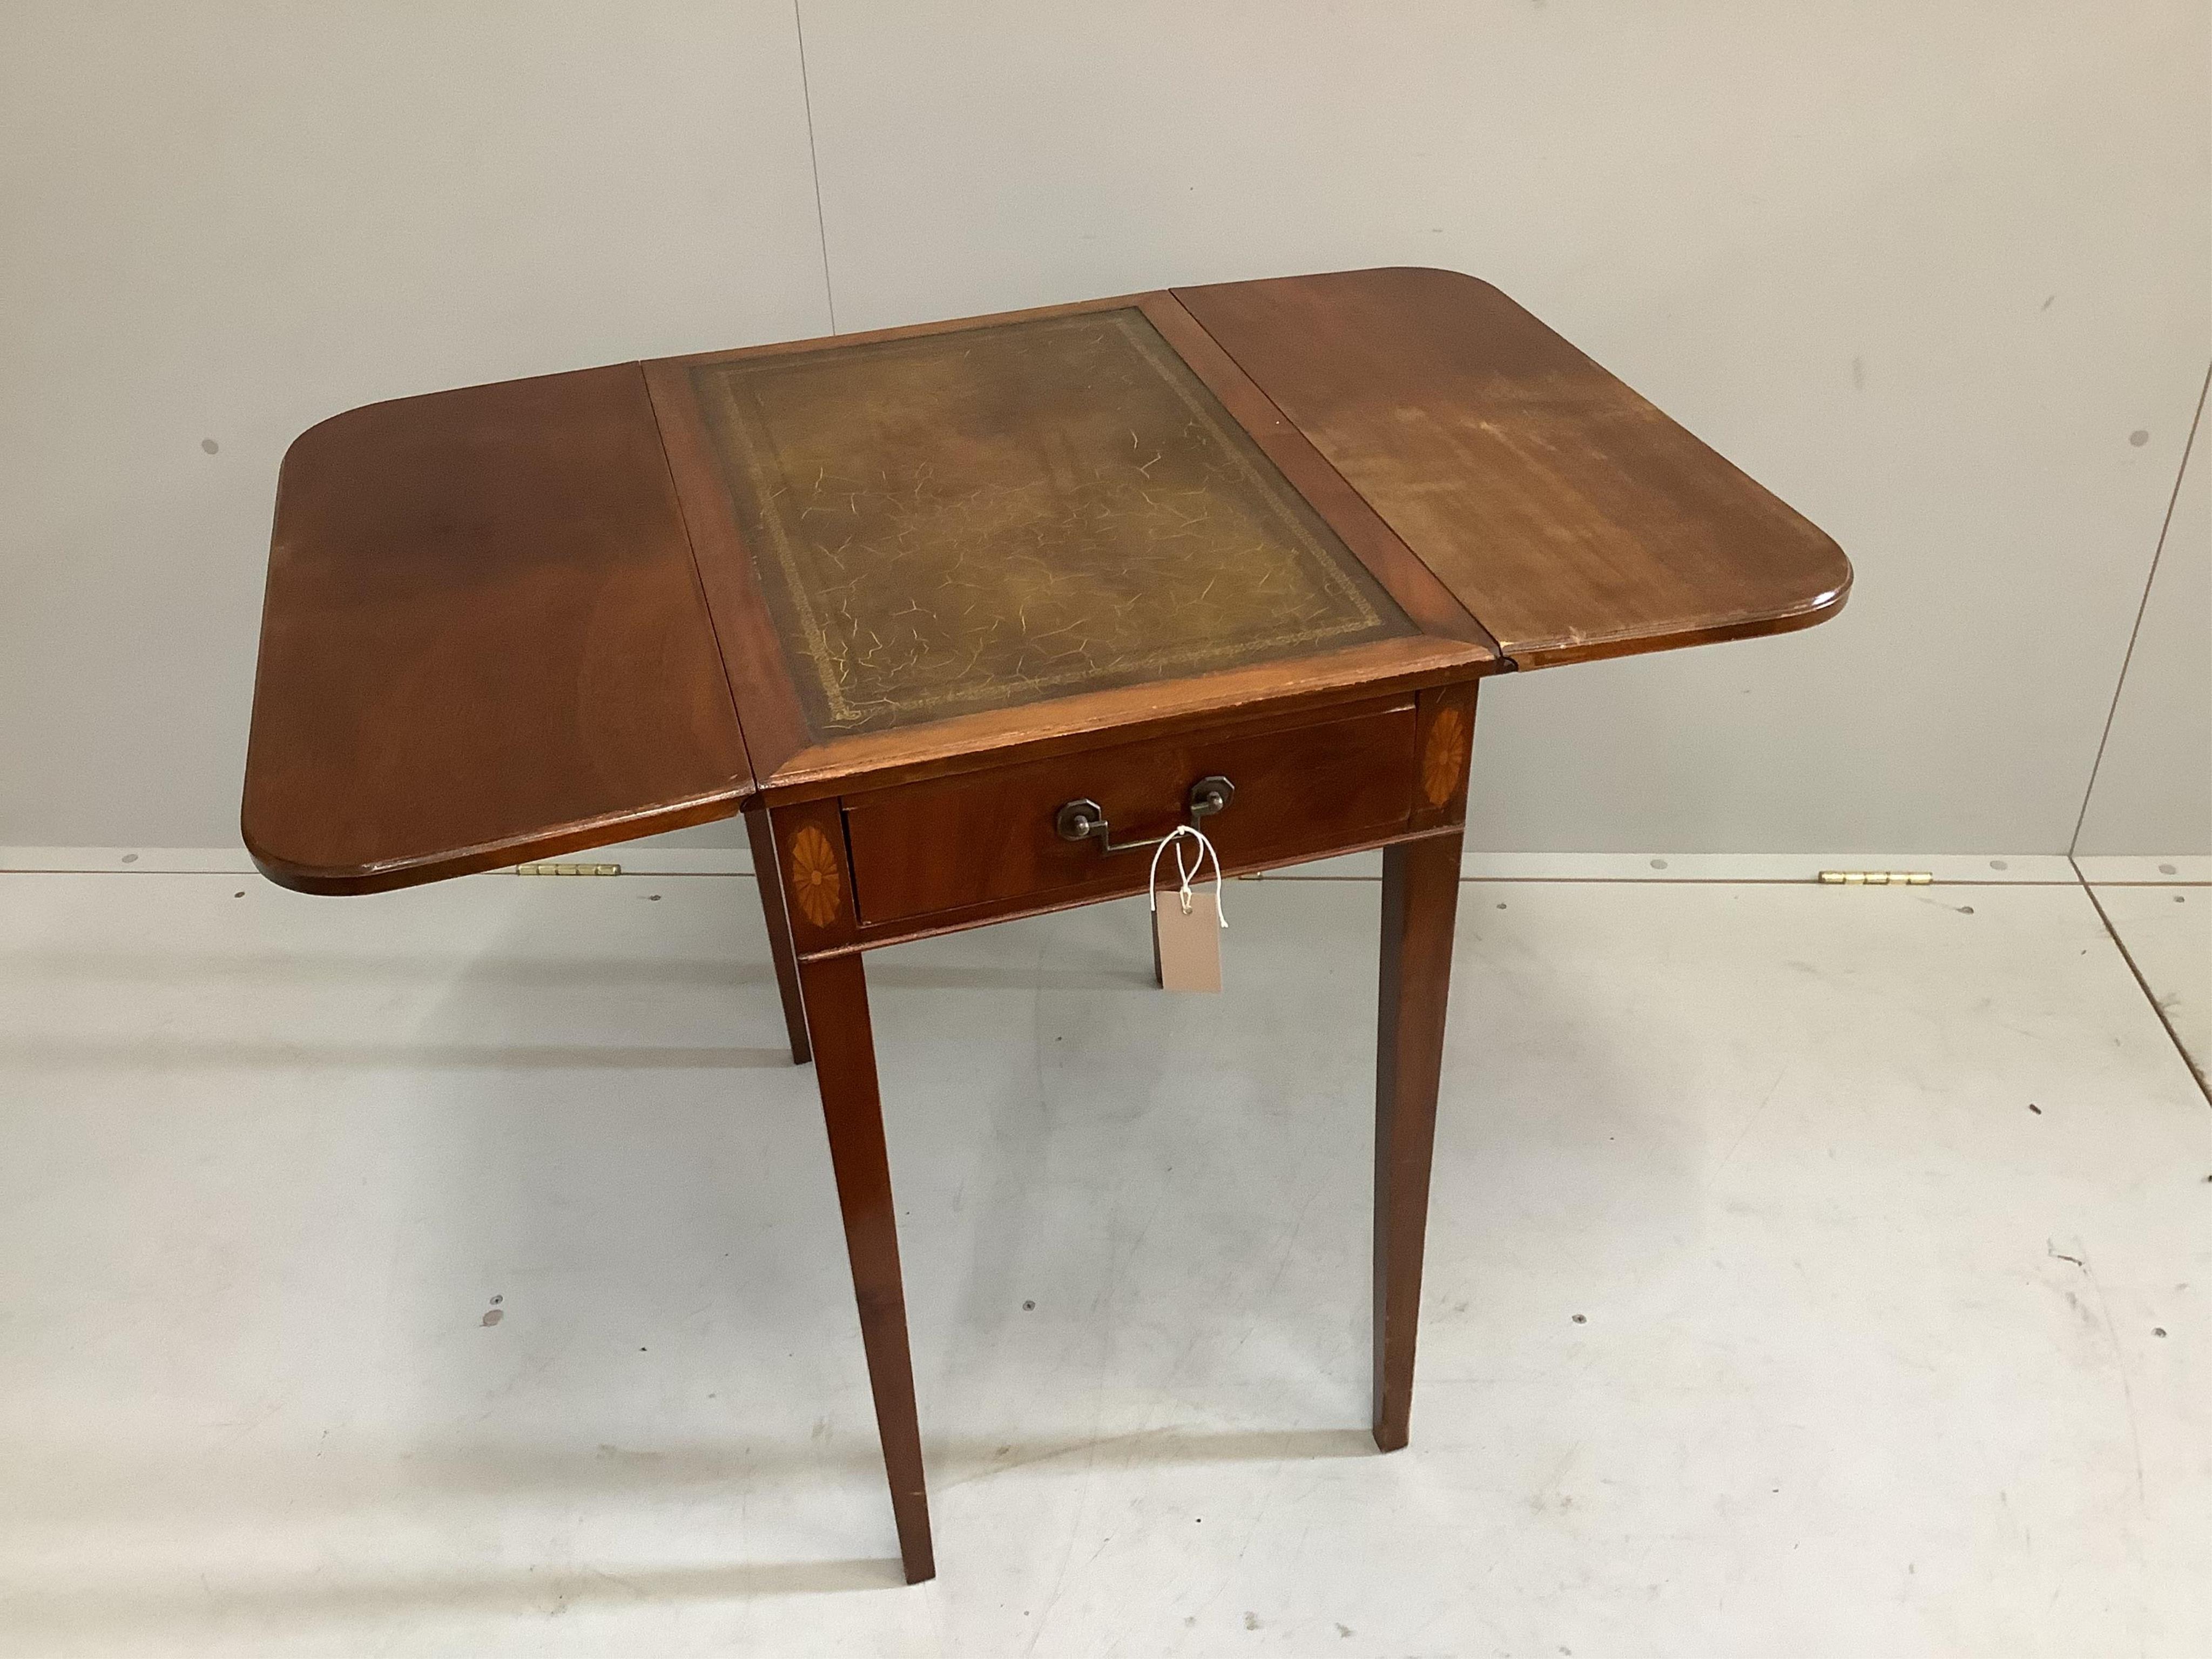 A reproduction George III style mahogany Pembroke table with leather inset top, width 61cm, depth 34cm, height 68cm. Condition - fair